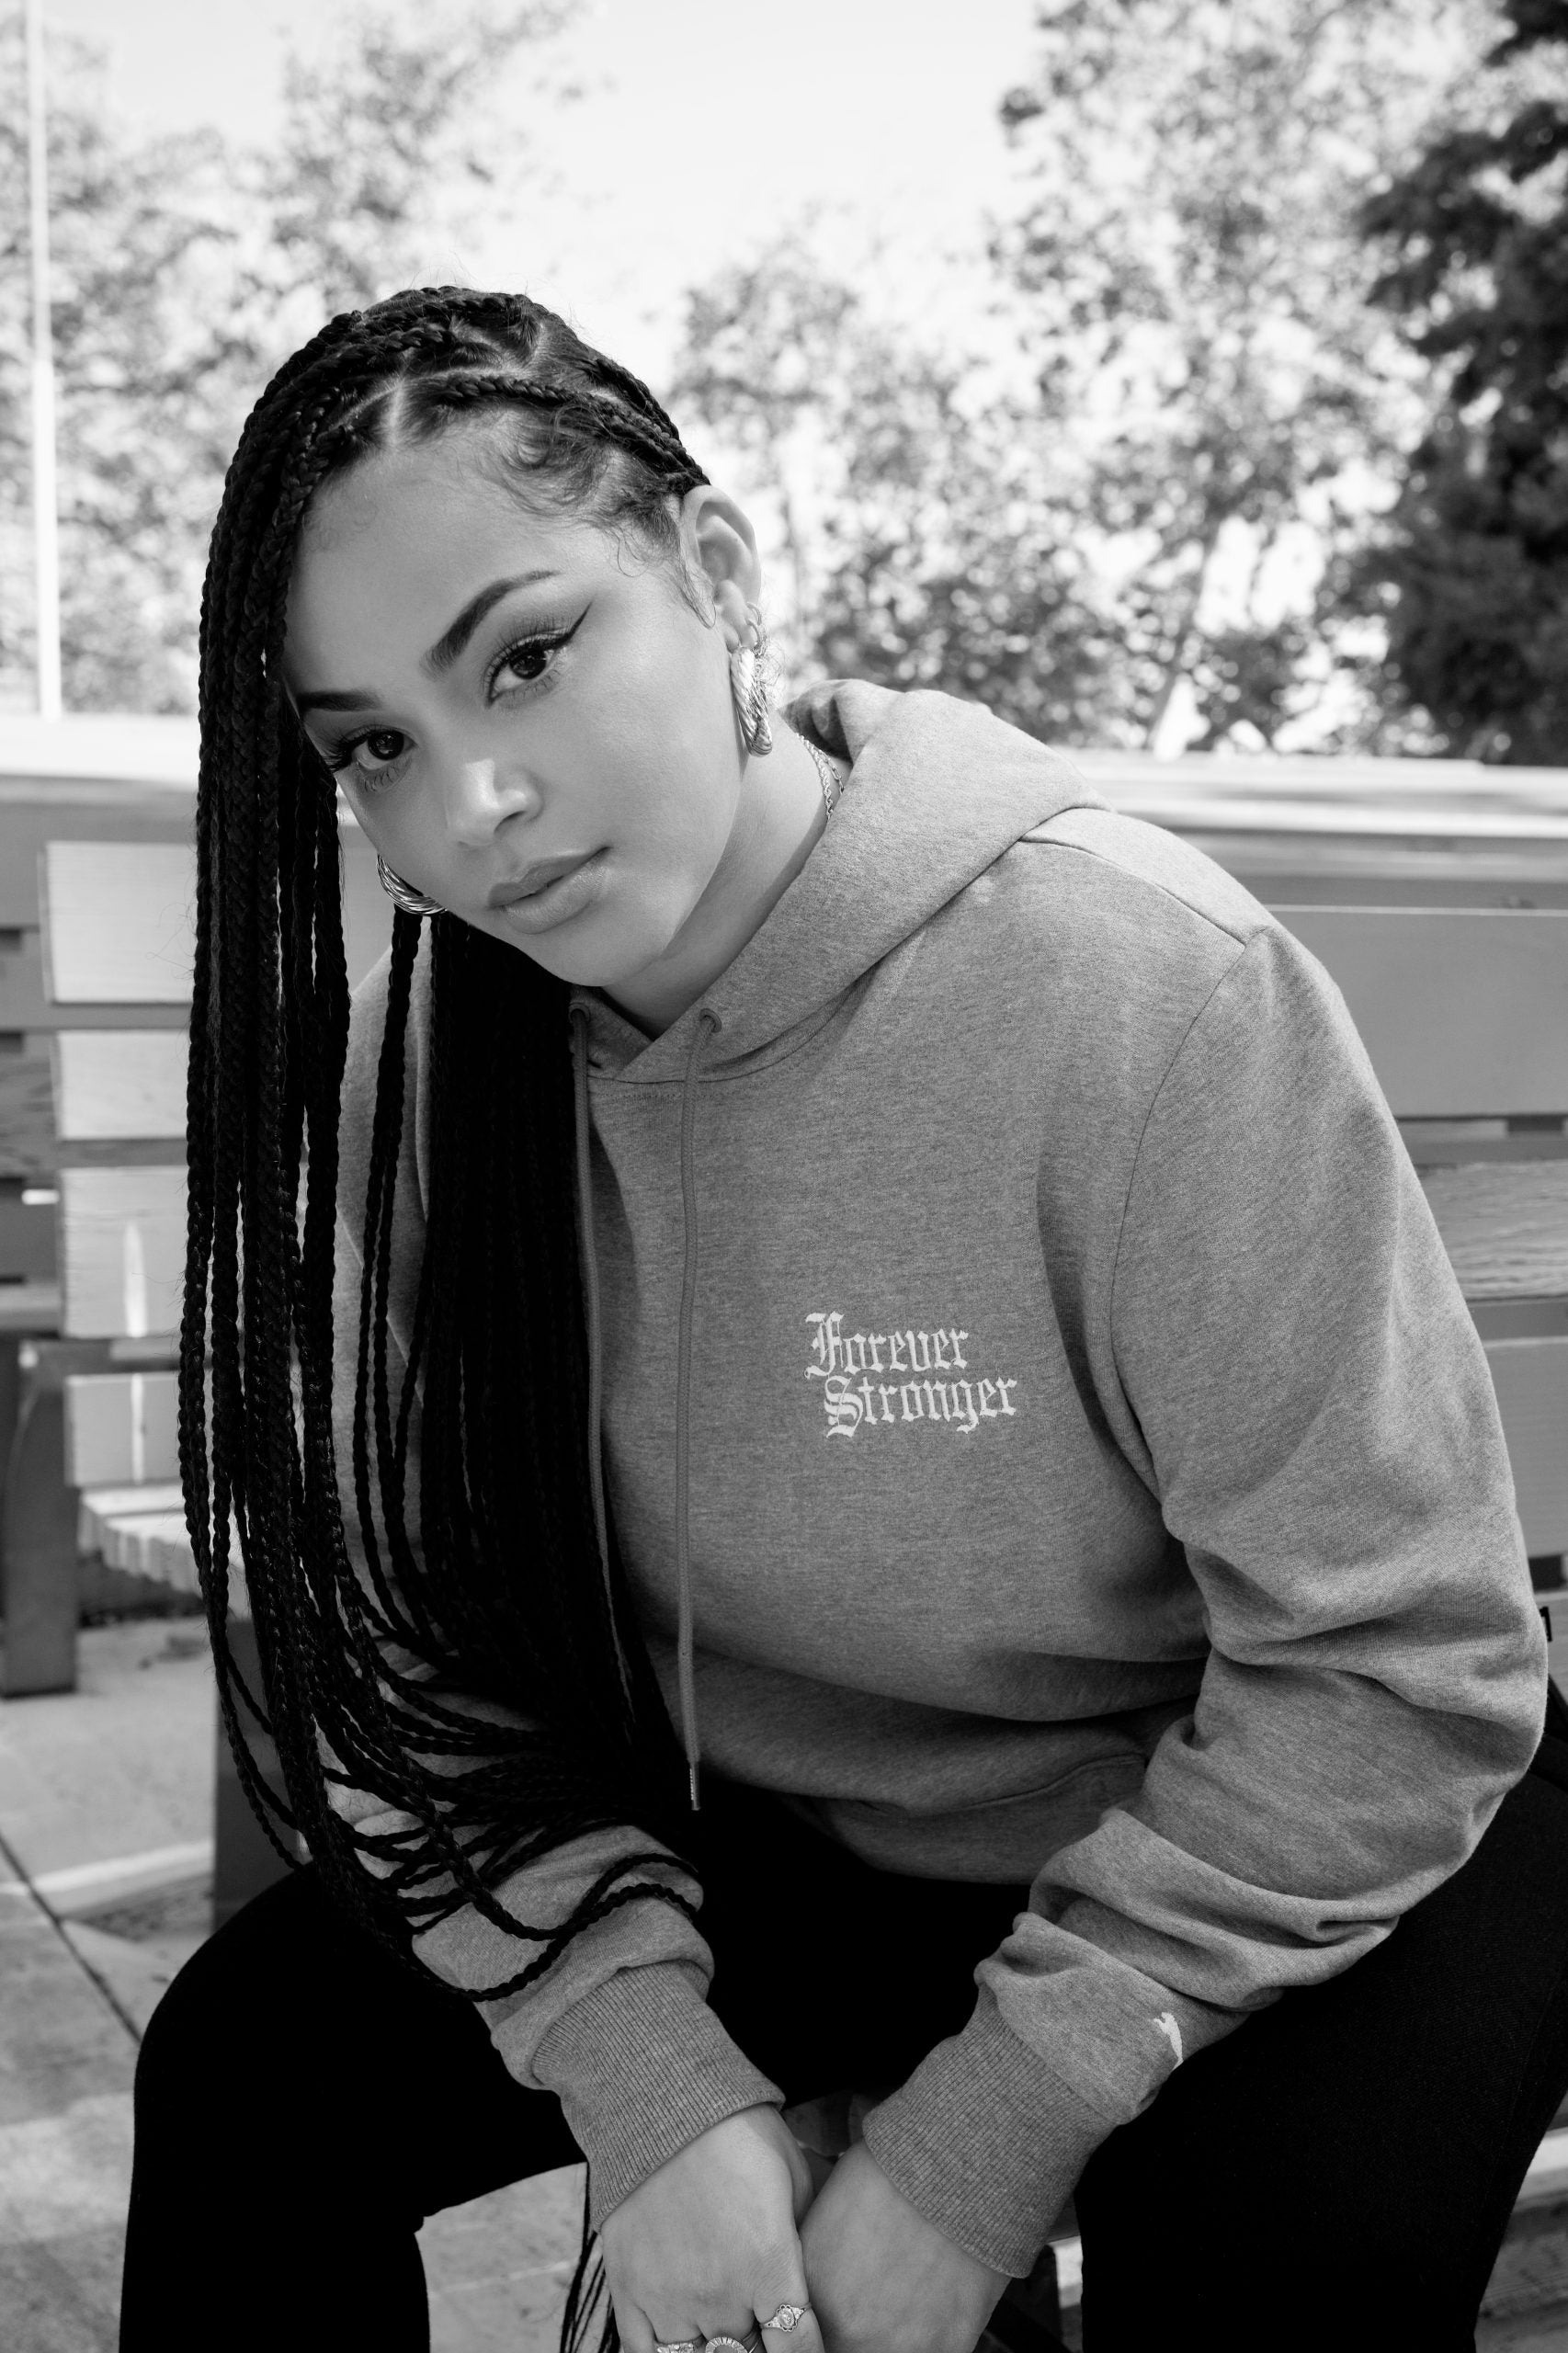 ’90s Music, ‘Golden Girls’ And Disneyland: Lauren London On The Simple Things That Bring Her Joy Now